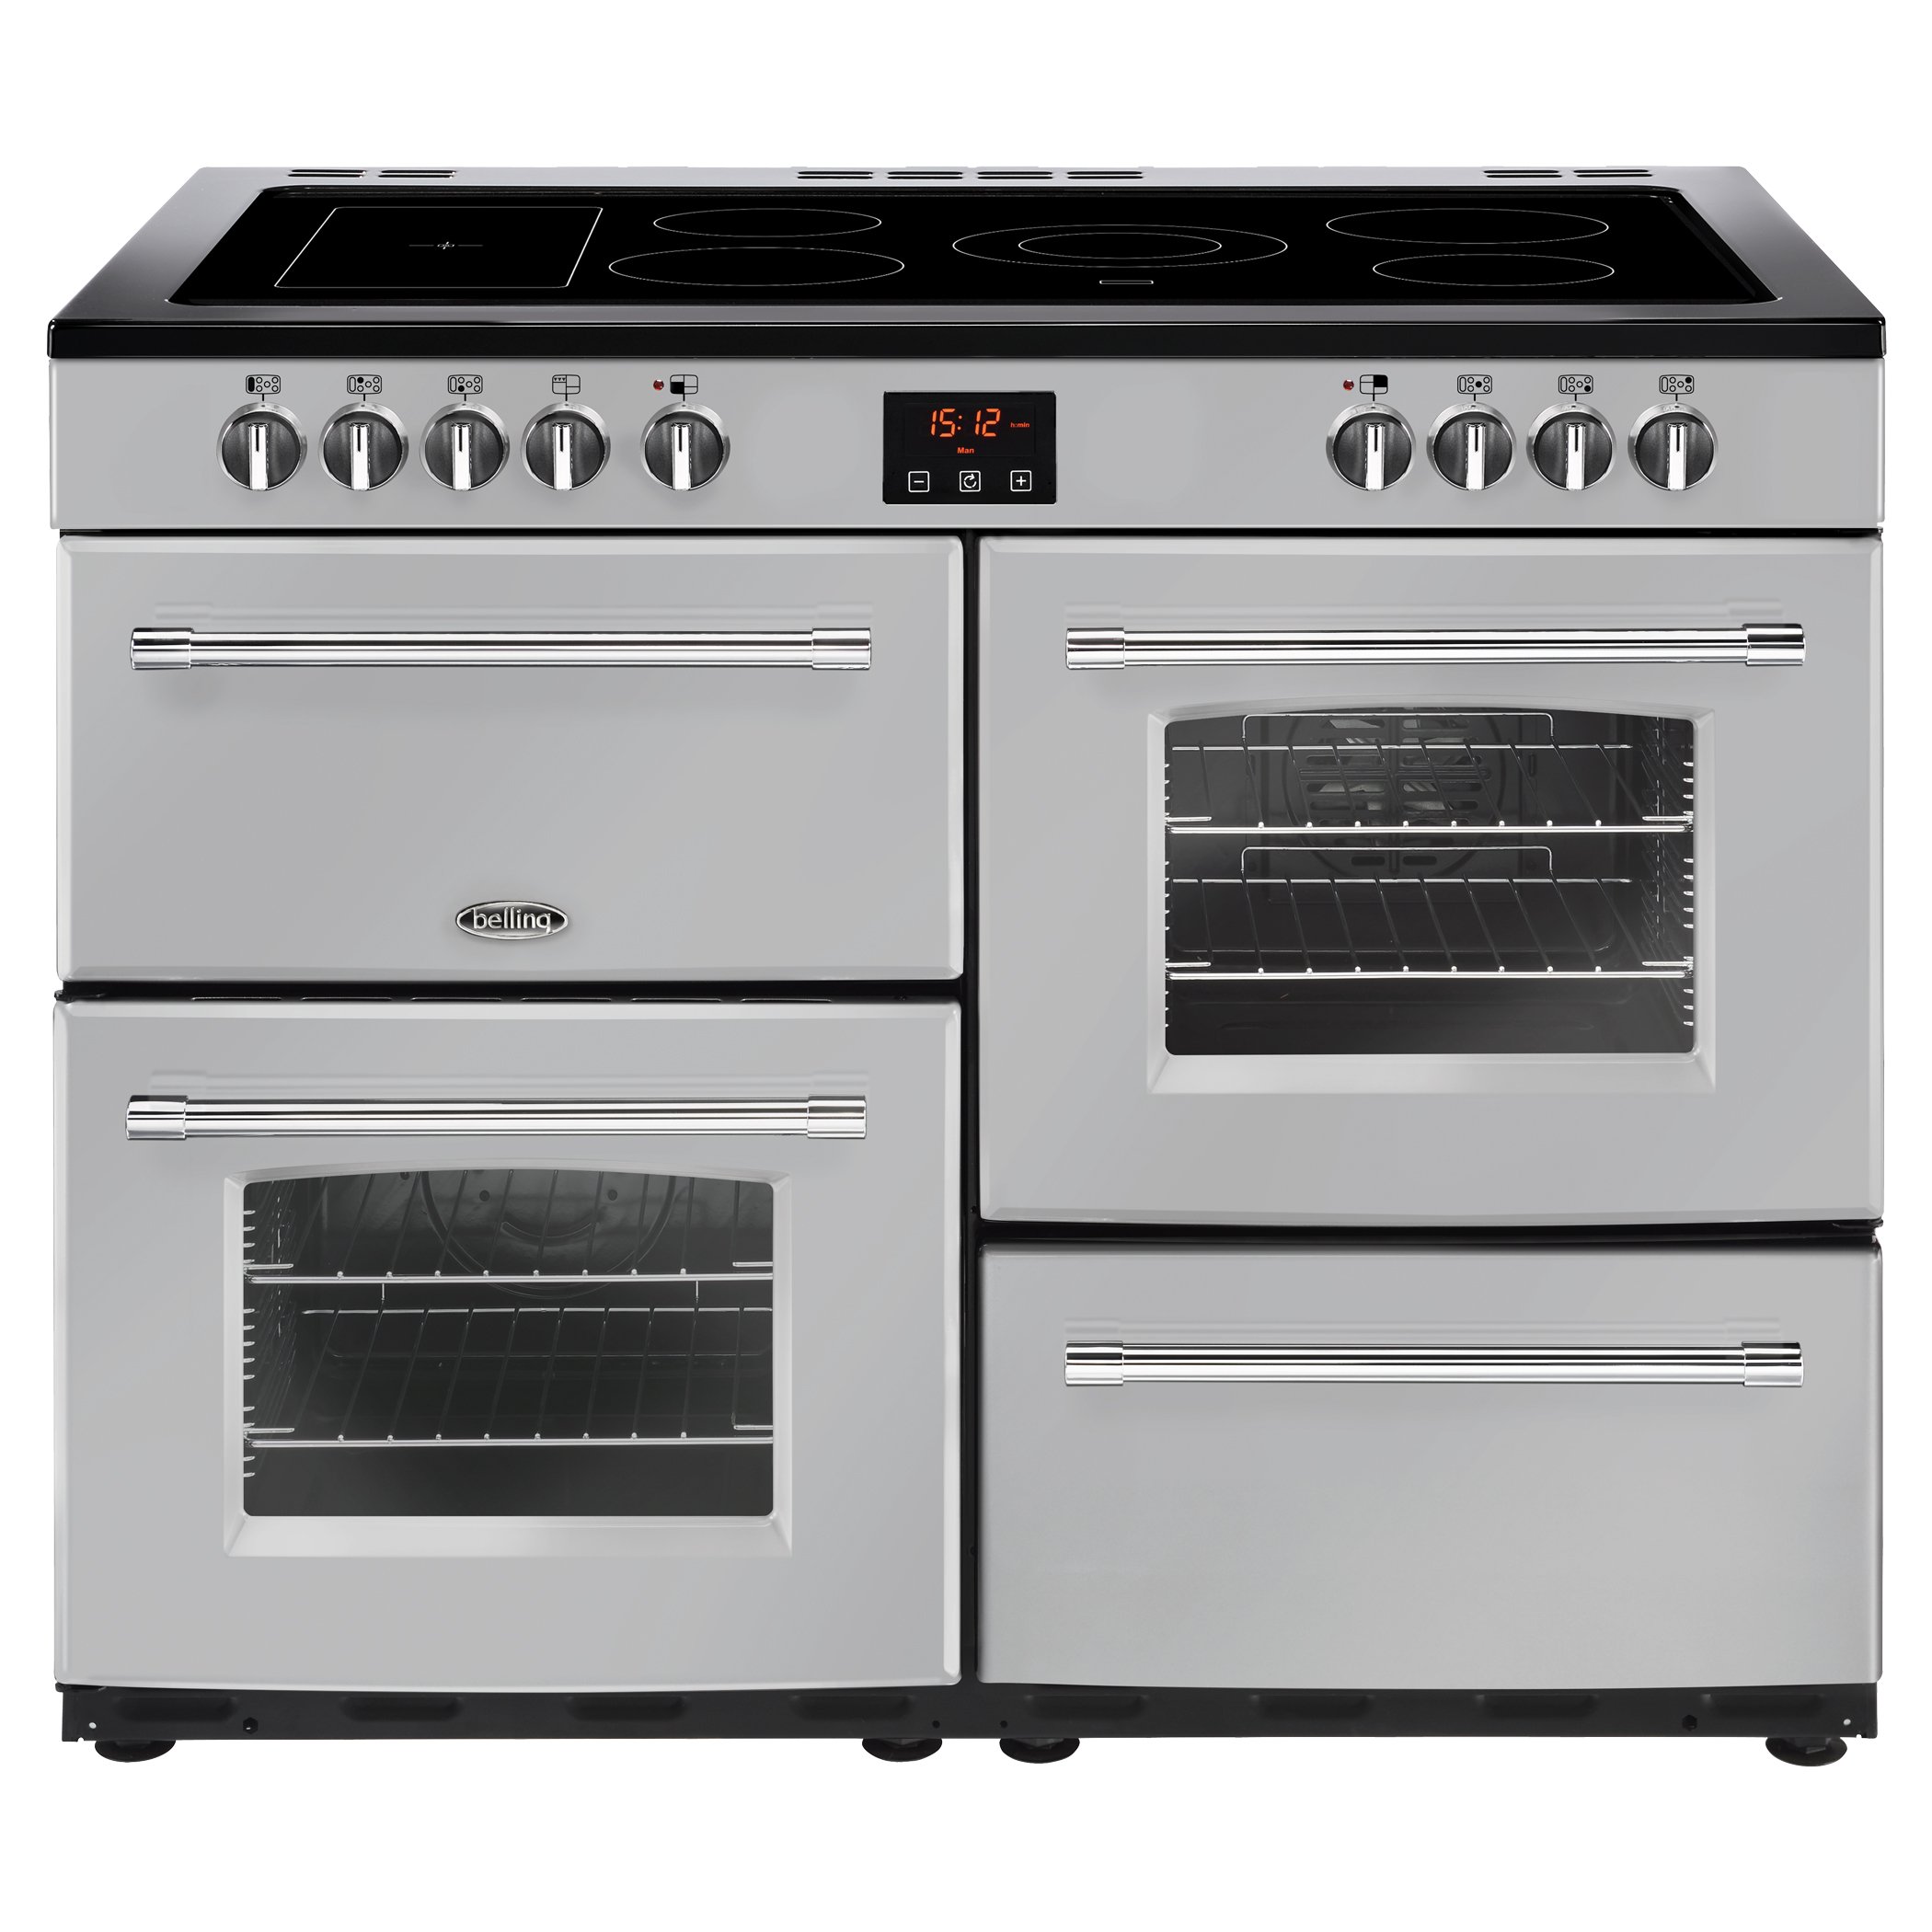 110cm electric range cooker with 5 zone ceramic hotplate plus warming zone, Maxi-Clock and easy clean enamel.